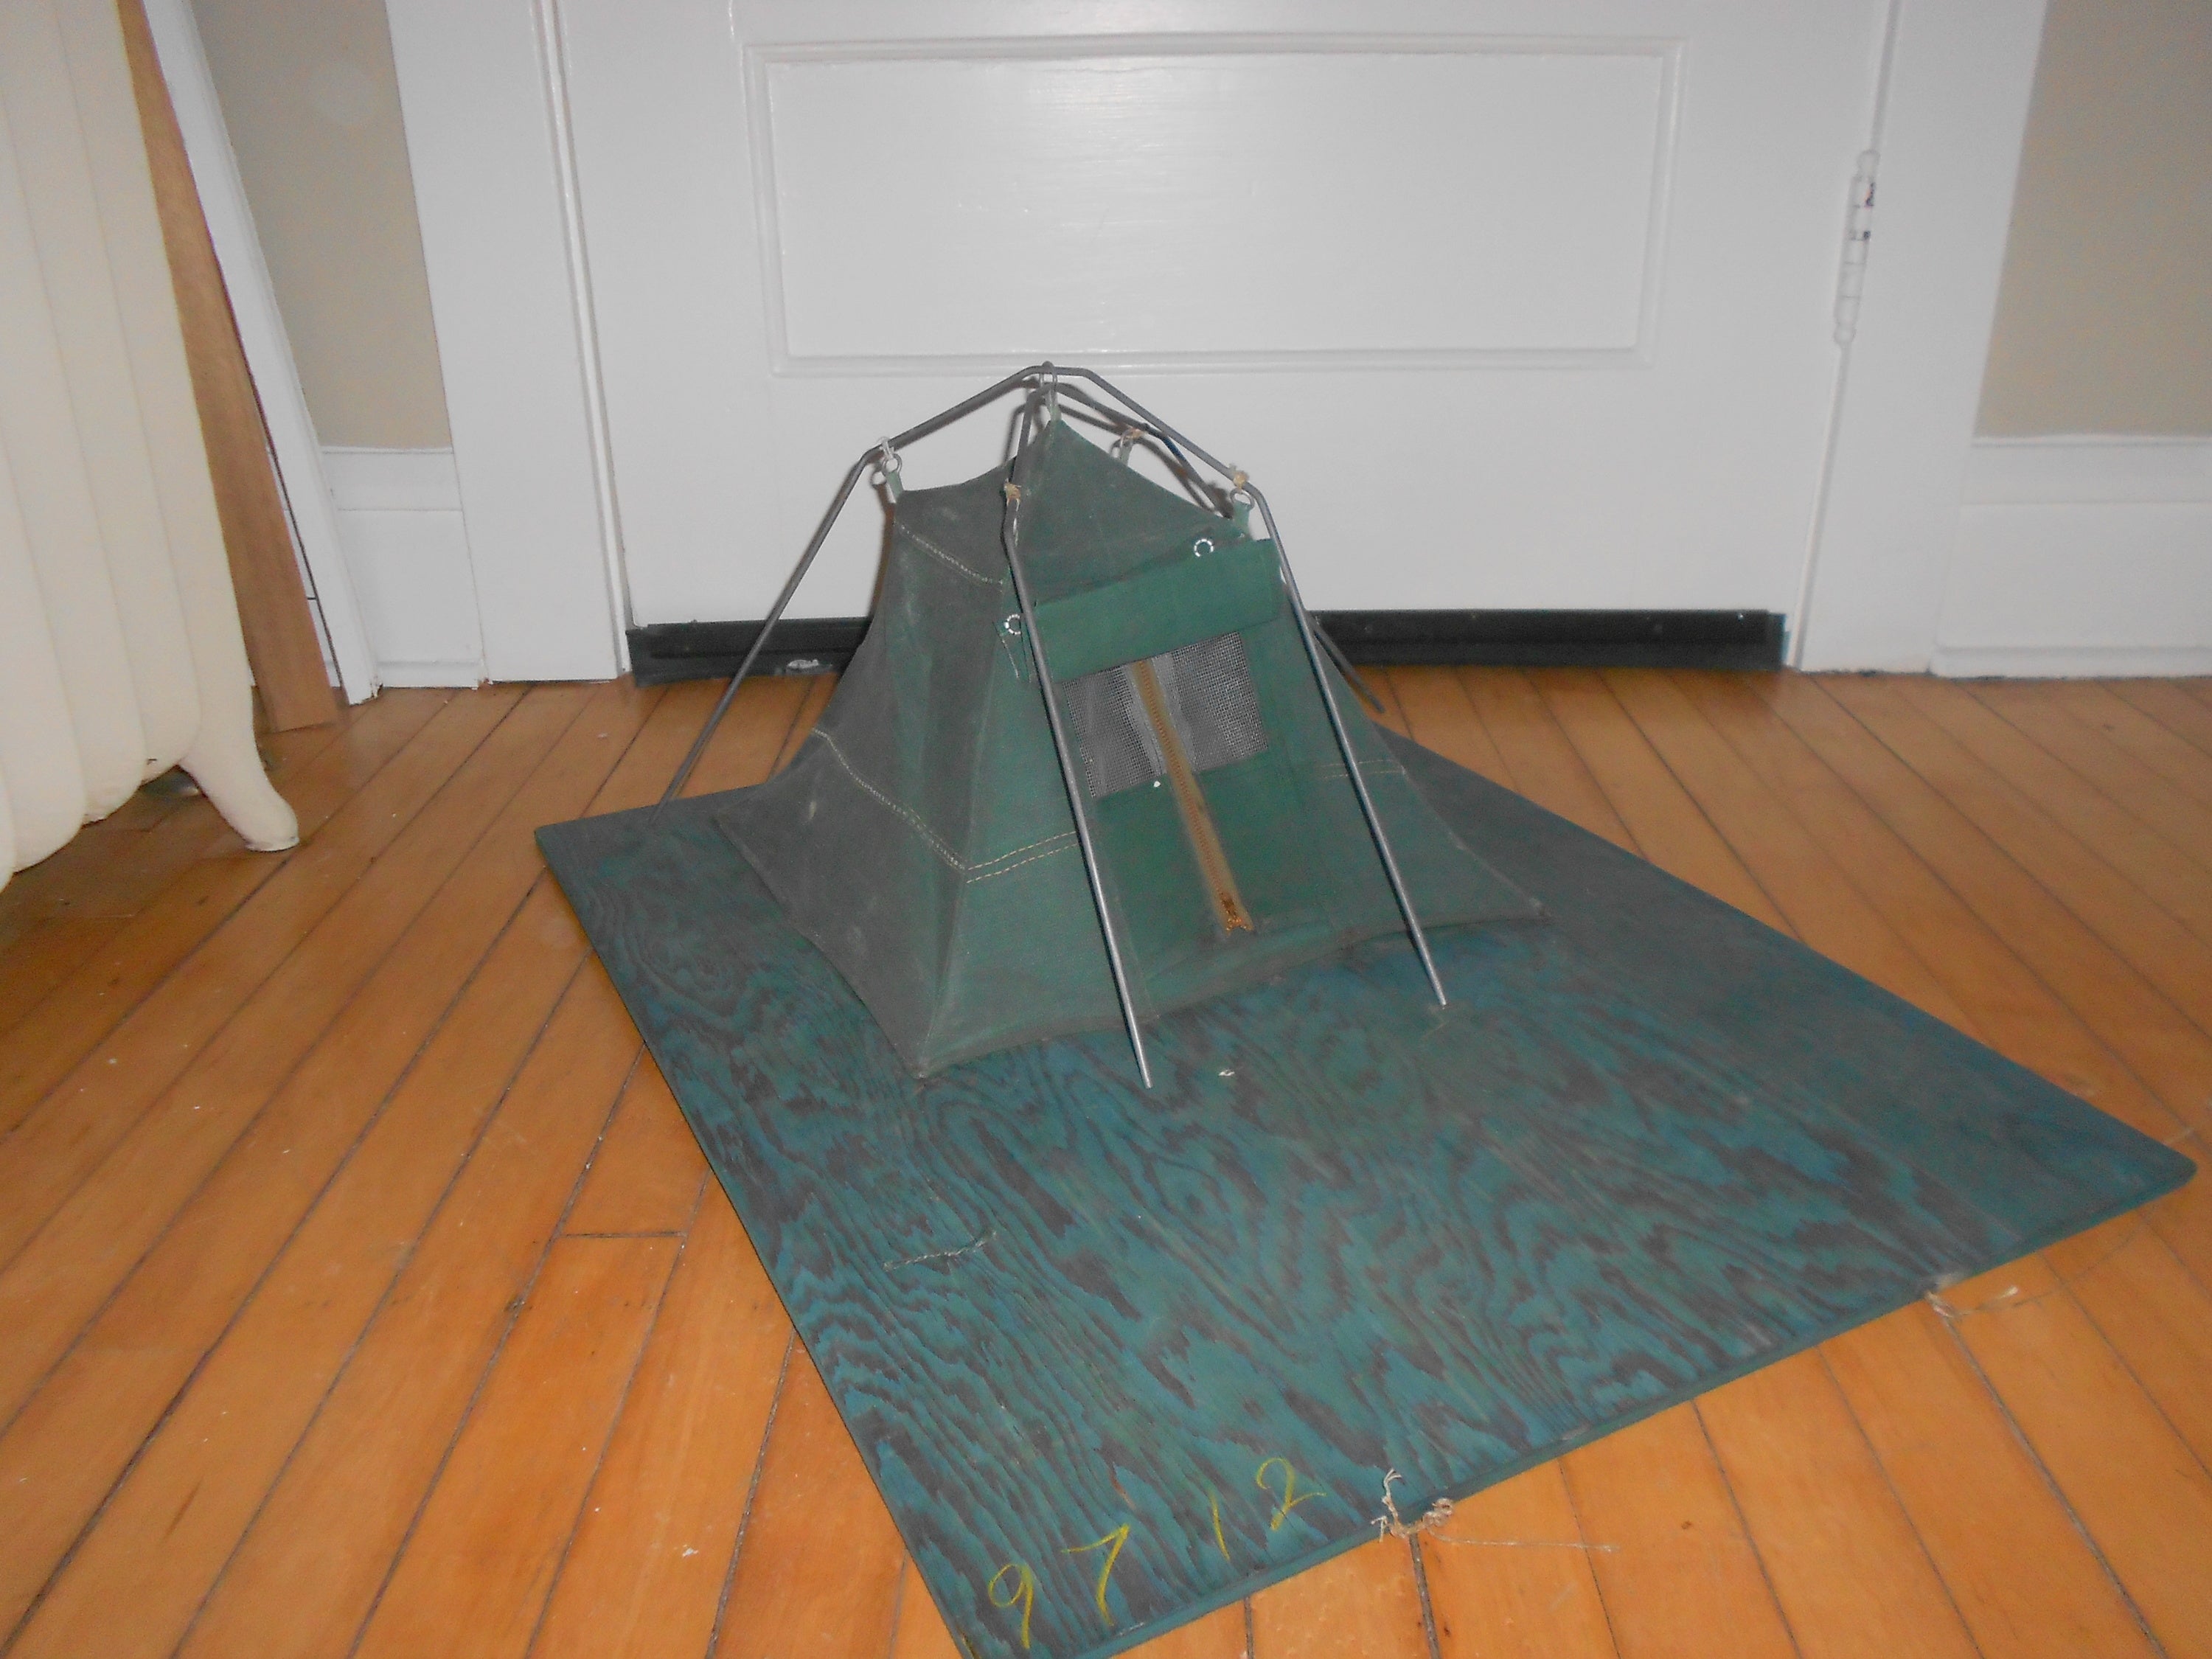 Canvas Tent downsized for salesman's sample